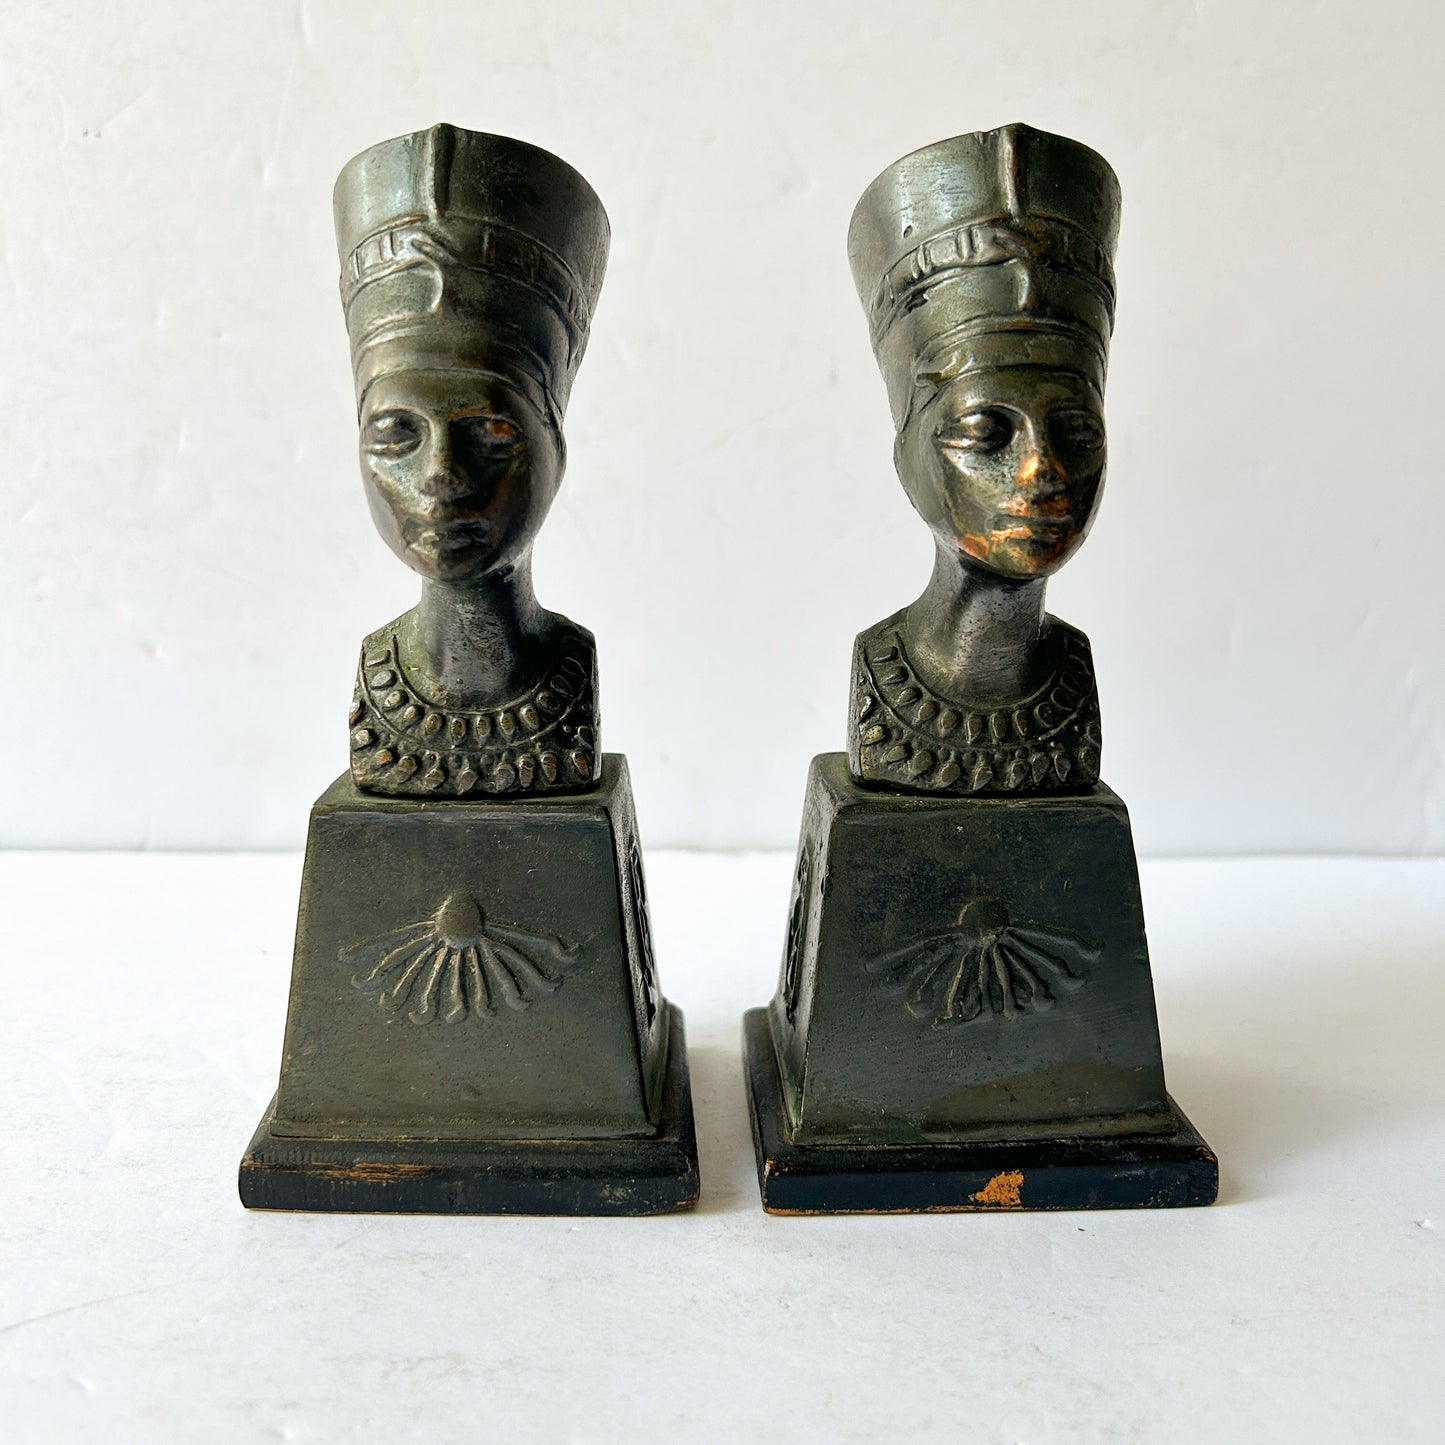 Vintage Egyptian Revival Style Queen Nefertiti Bookends